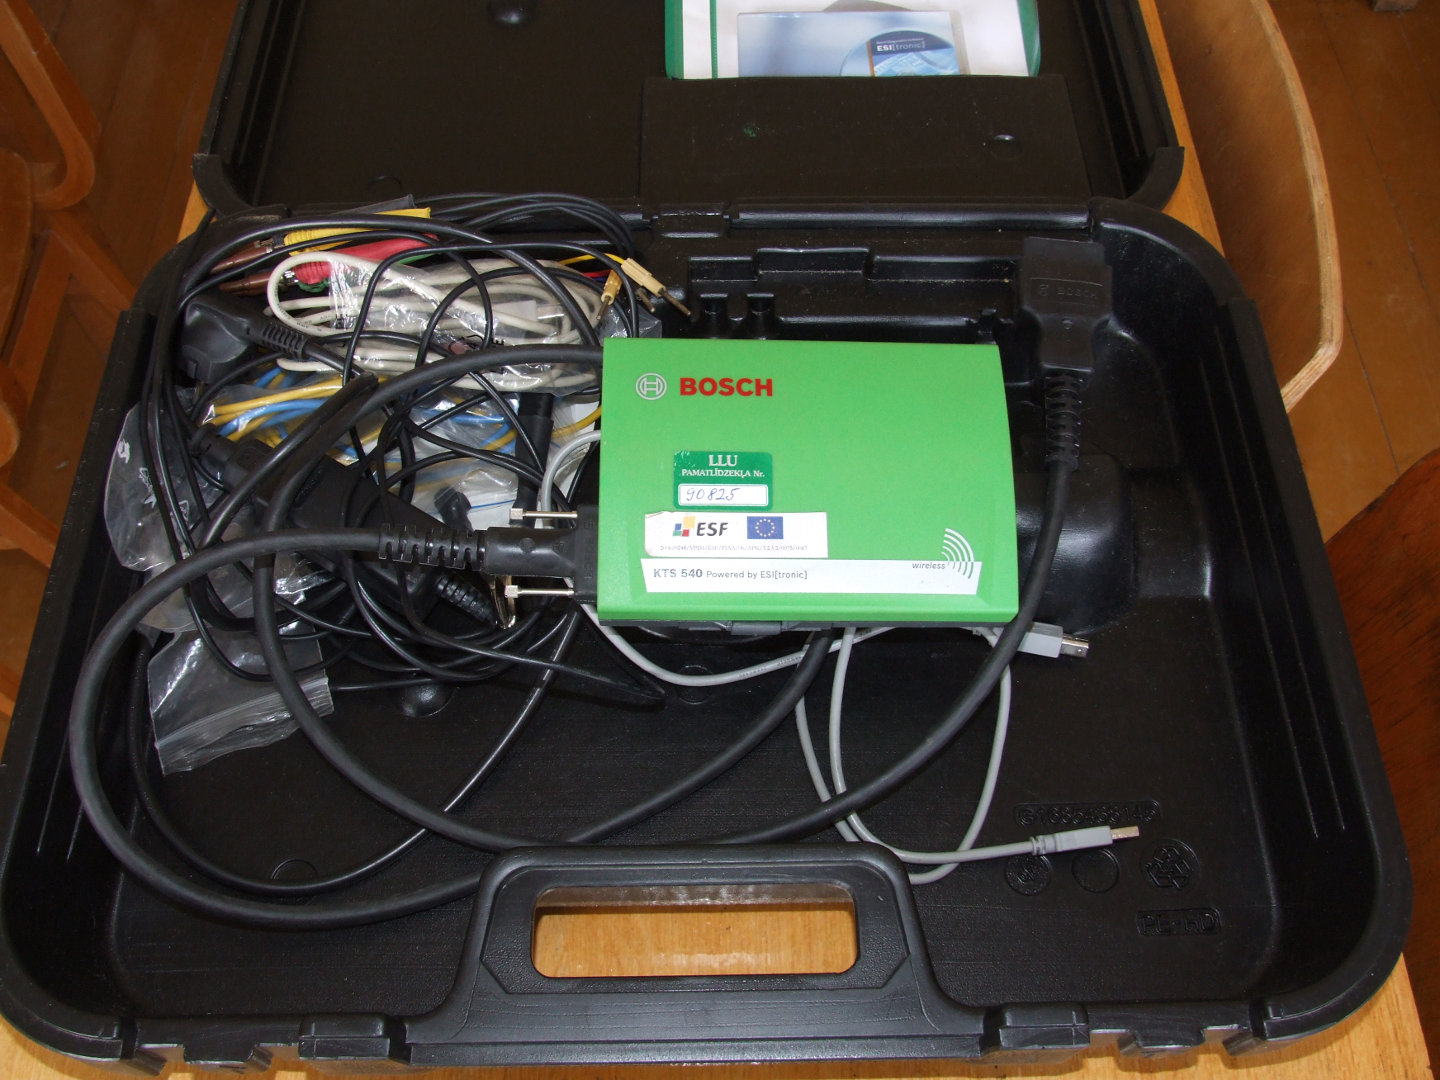 BOSCH functional diagnostic tool